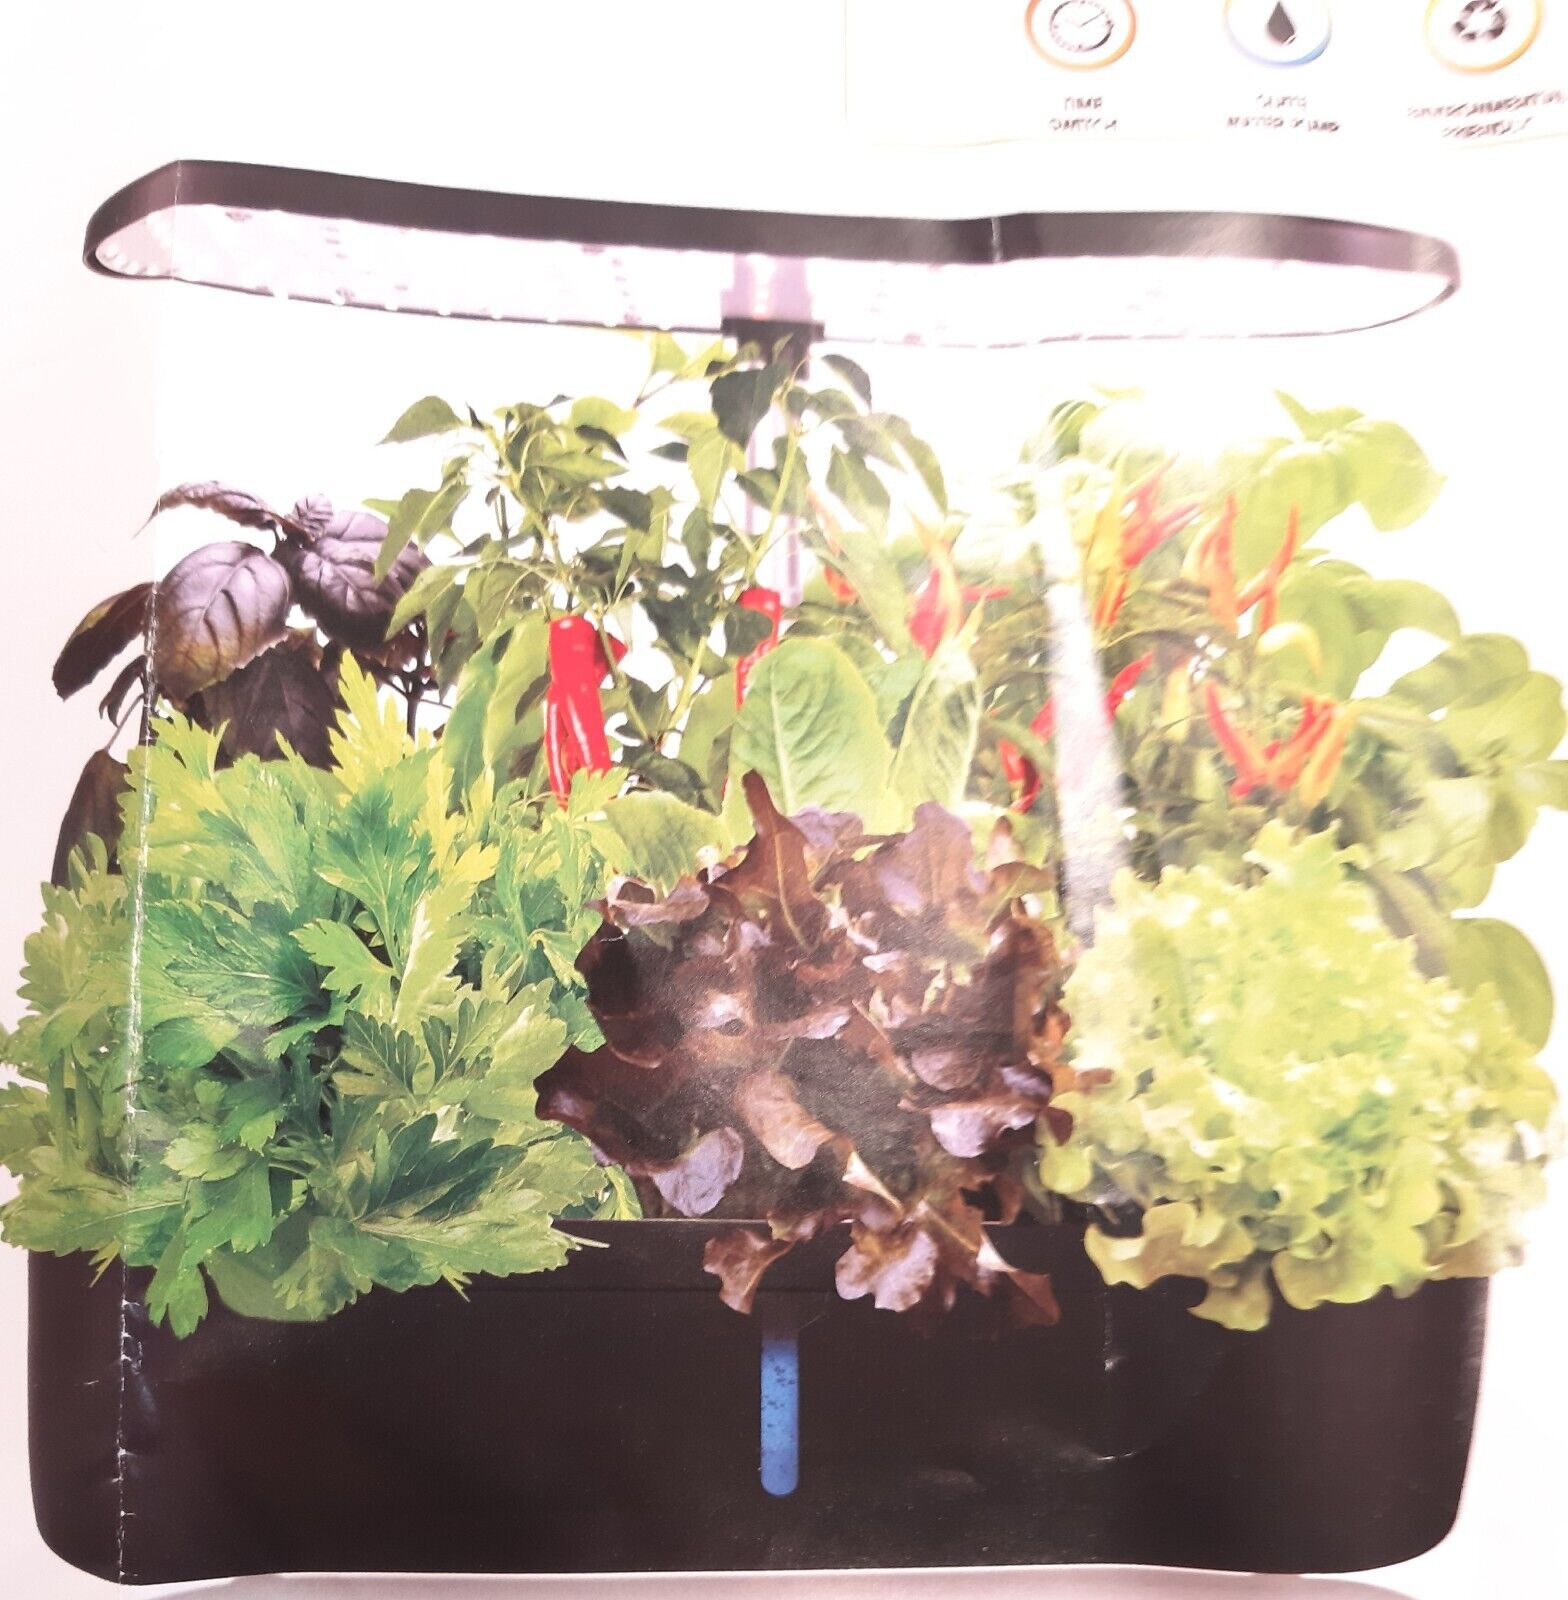 (Black)Indoor Garden Hydroponics Growing System 12 Pods Automatic Water